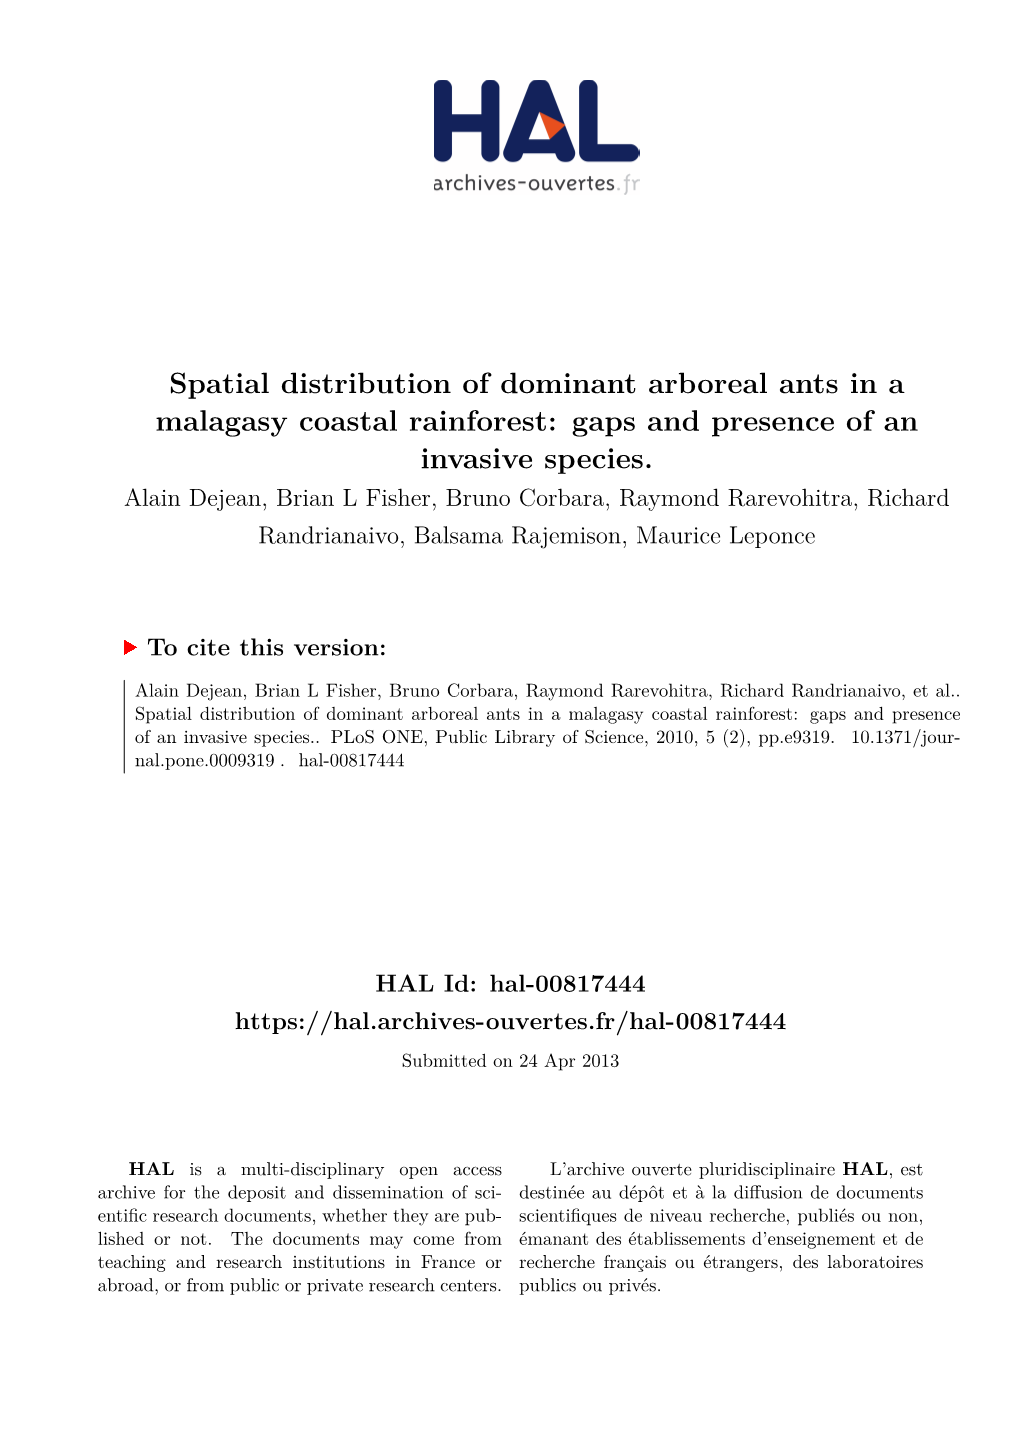 Spatial Distribution of Dominant Arboreal Ants in a Malagasy Coastal Rainforest: Gaps and Presence of an Invasive Species